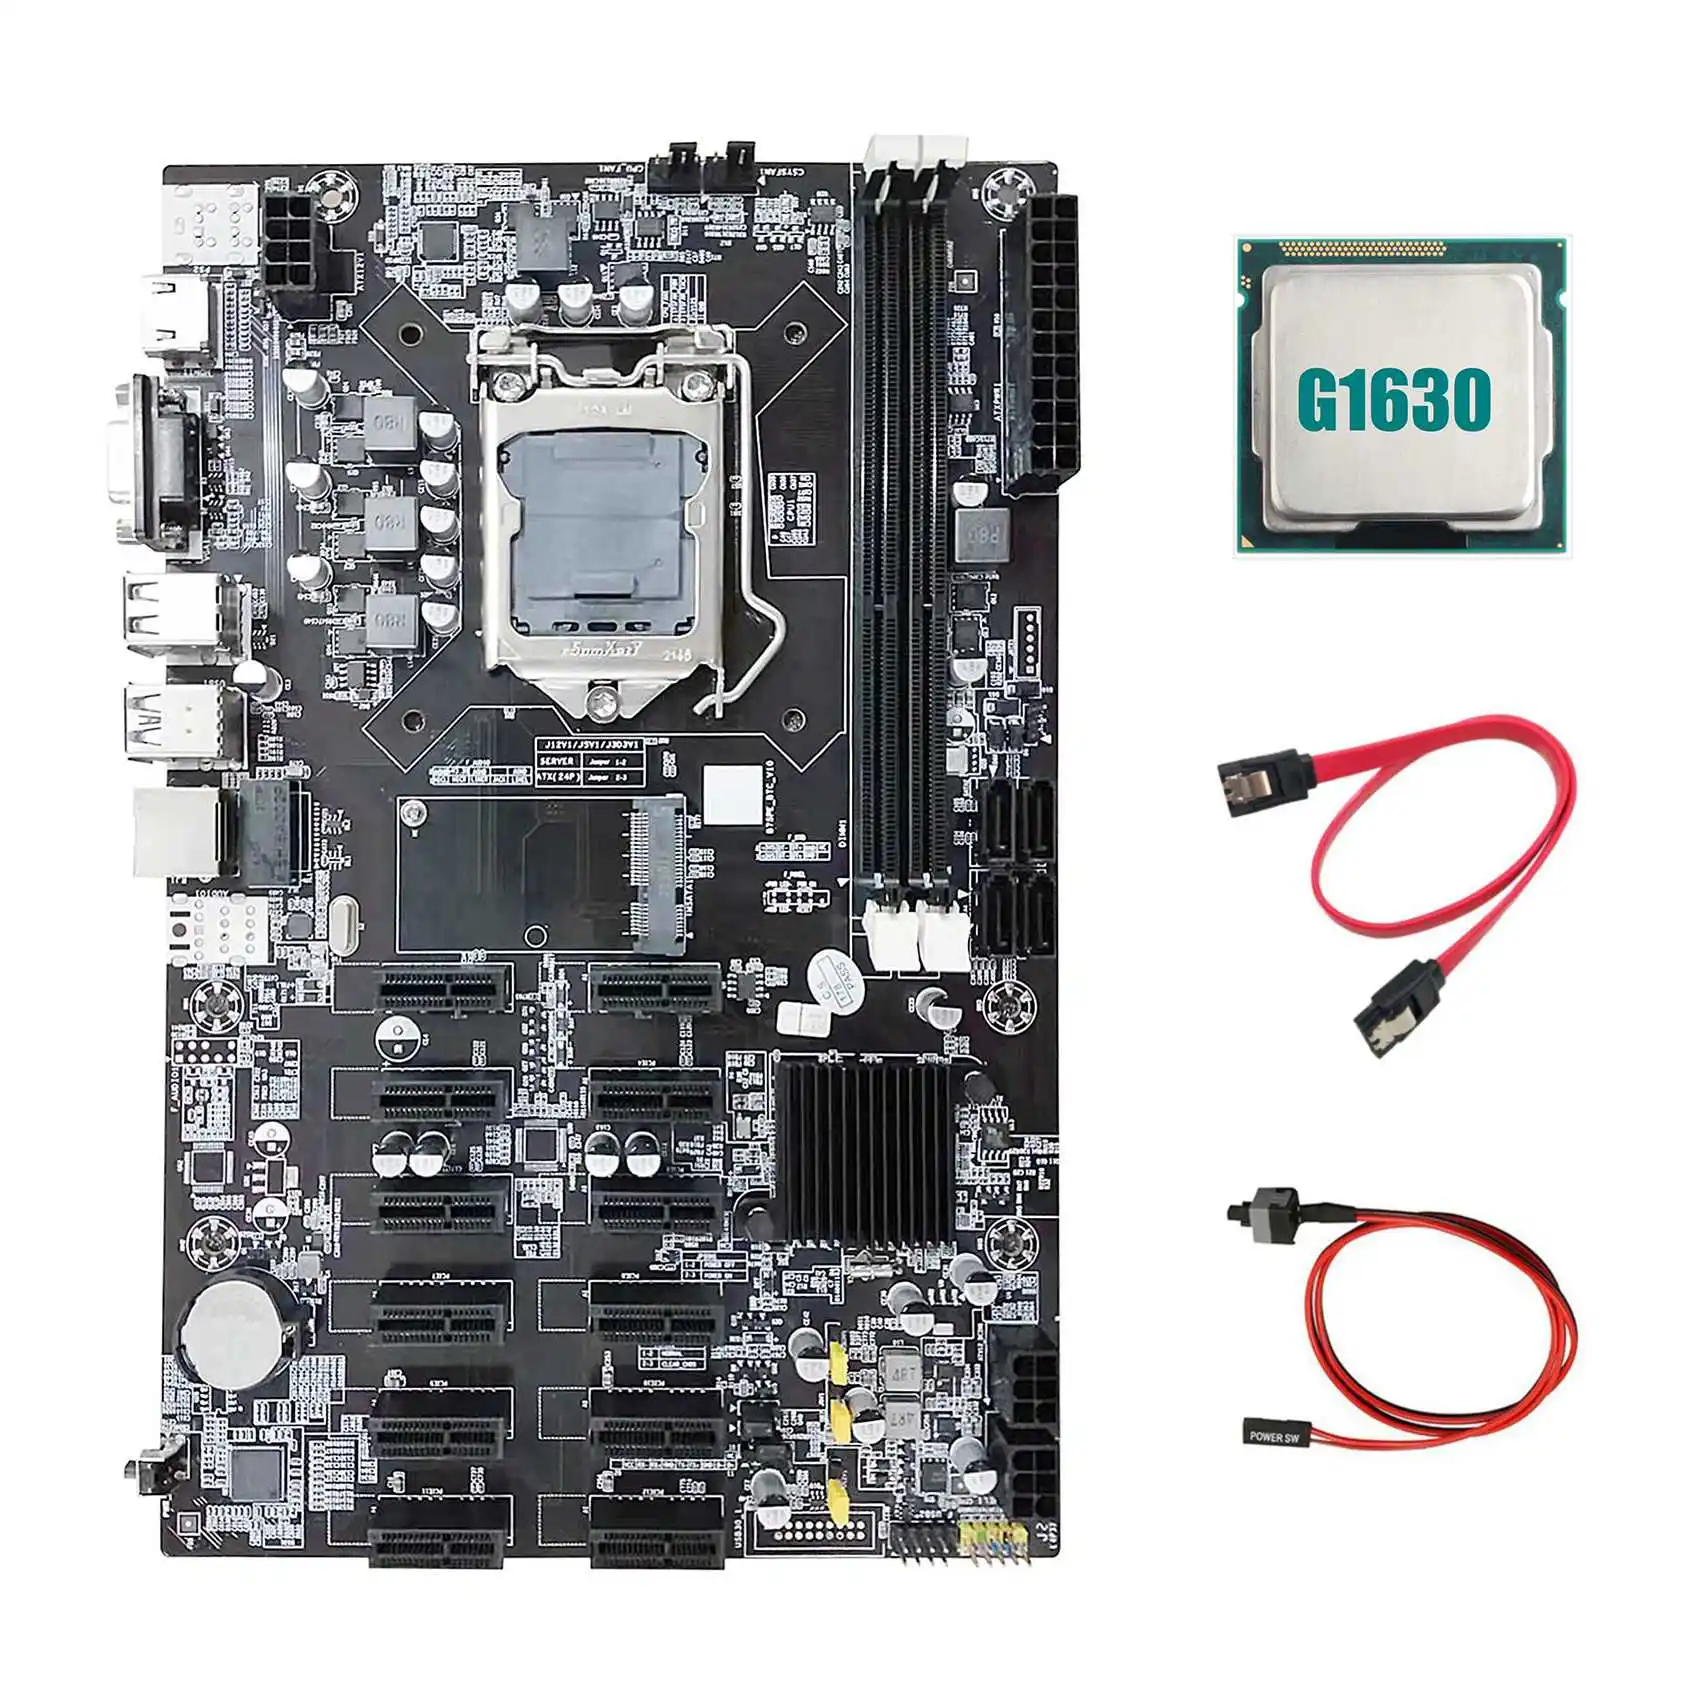 B75 12 PCIE ETH Mining Motherboard+G1630 CPU+SATA Cable+Switch Cable LGA1155 MSATA DDR3 B75 BTC Miner Motherboard